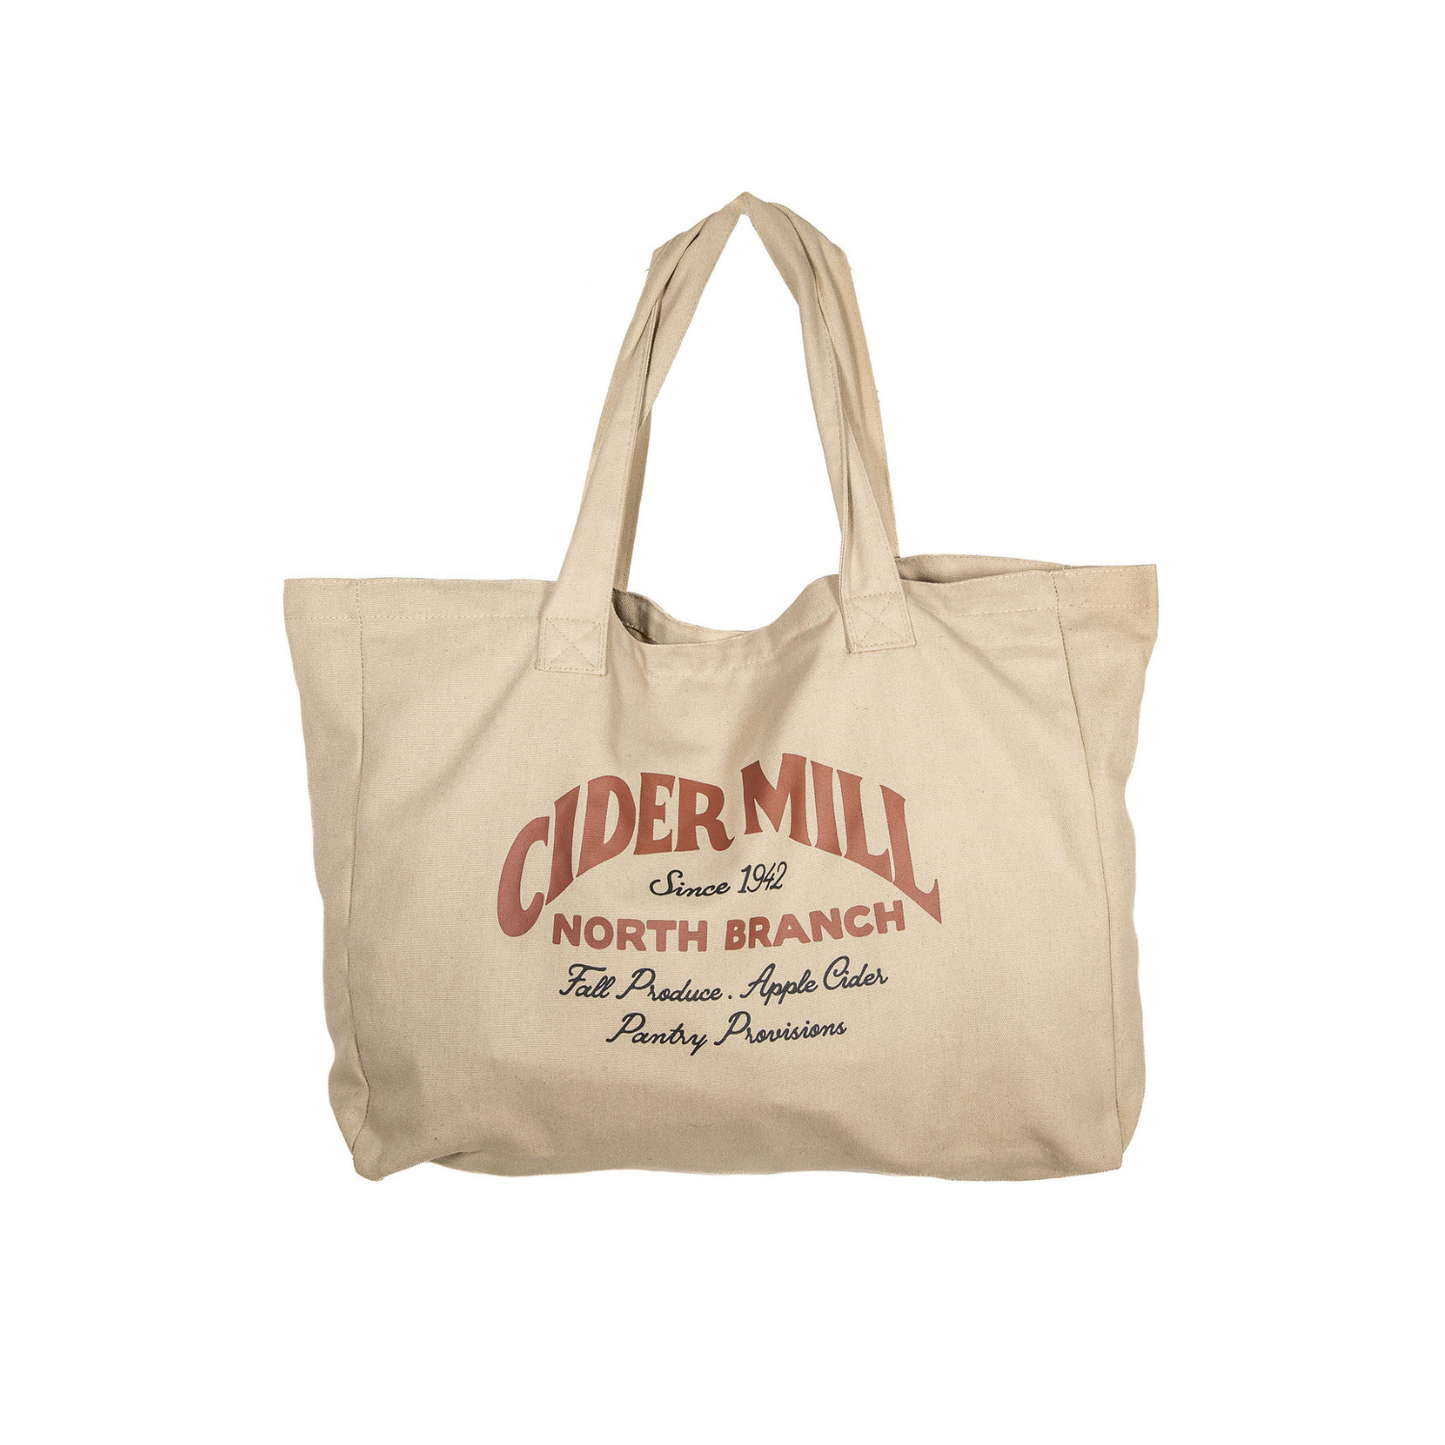 Cider Mill Large Tote